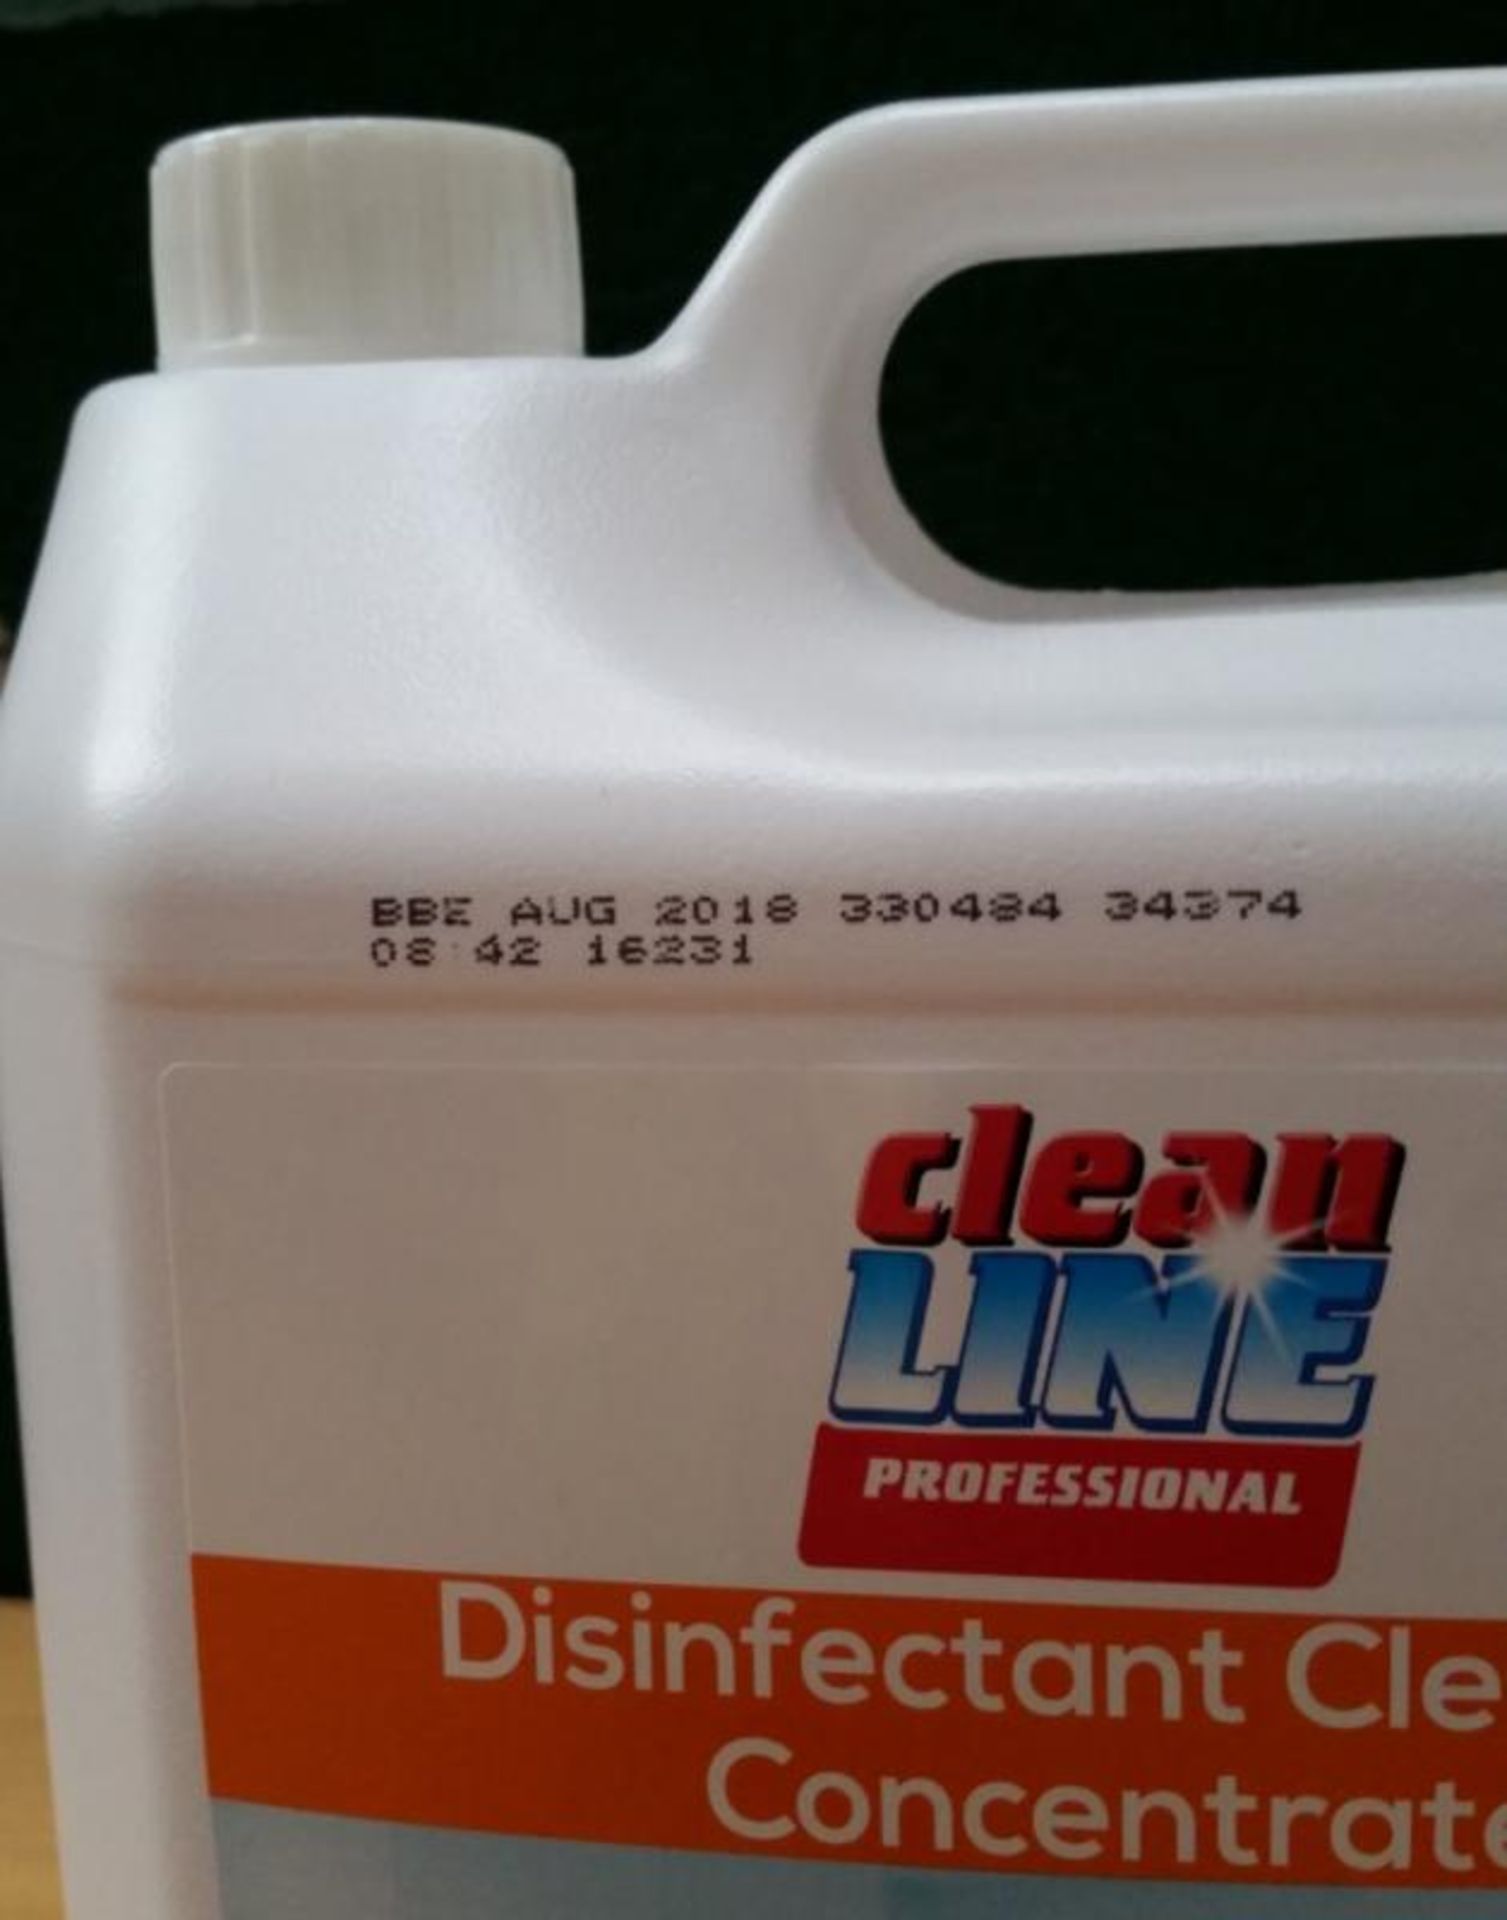 2 x Clean Line Professional 5 Litre Disinfectant Cleaner Concentrate - Fresh Lemon Fragrance - - Image 4 of 5